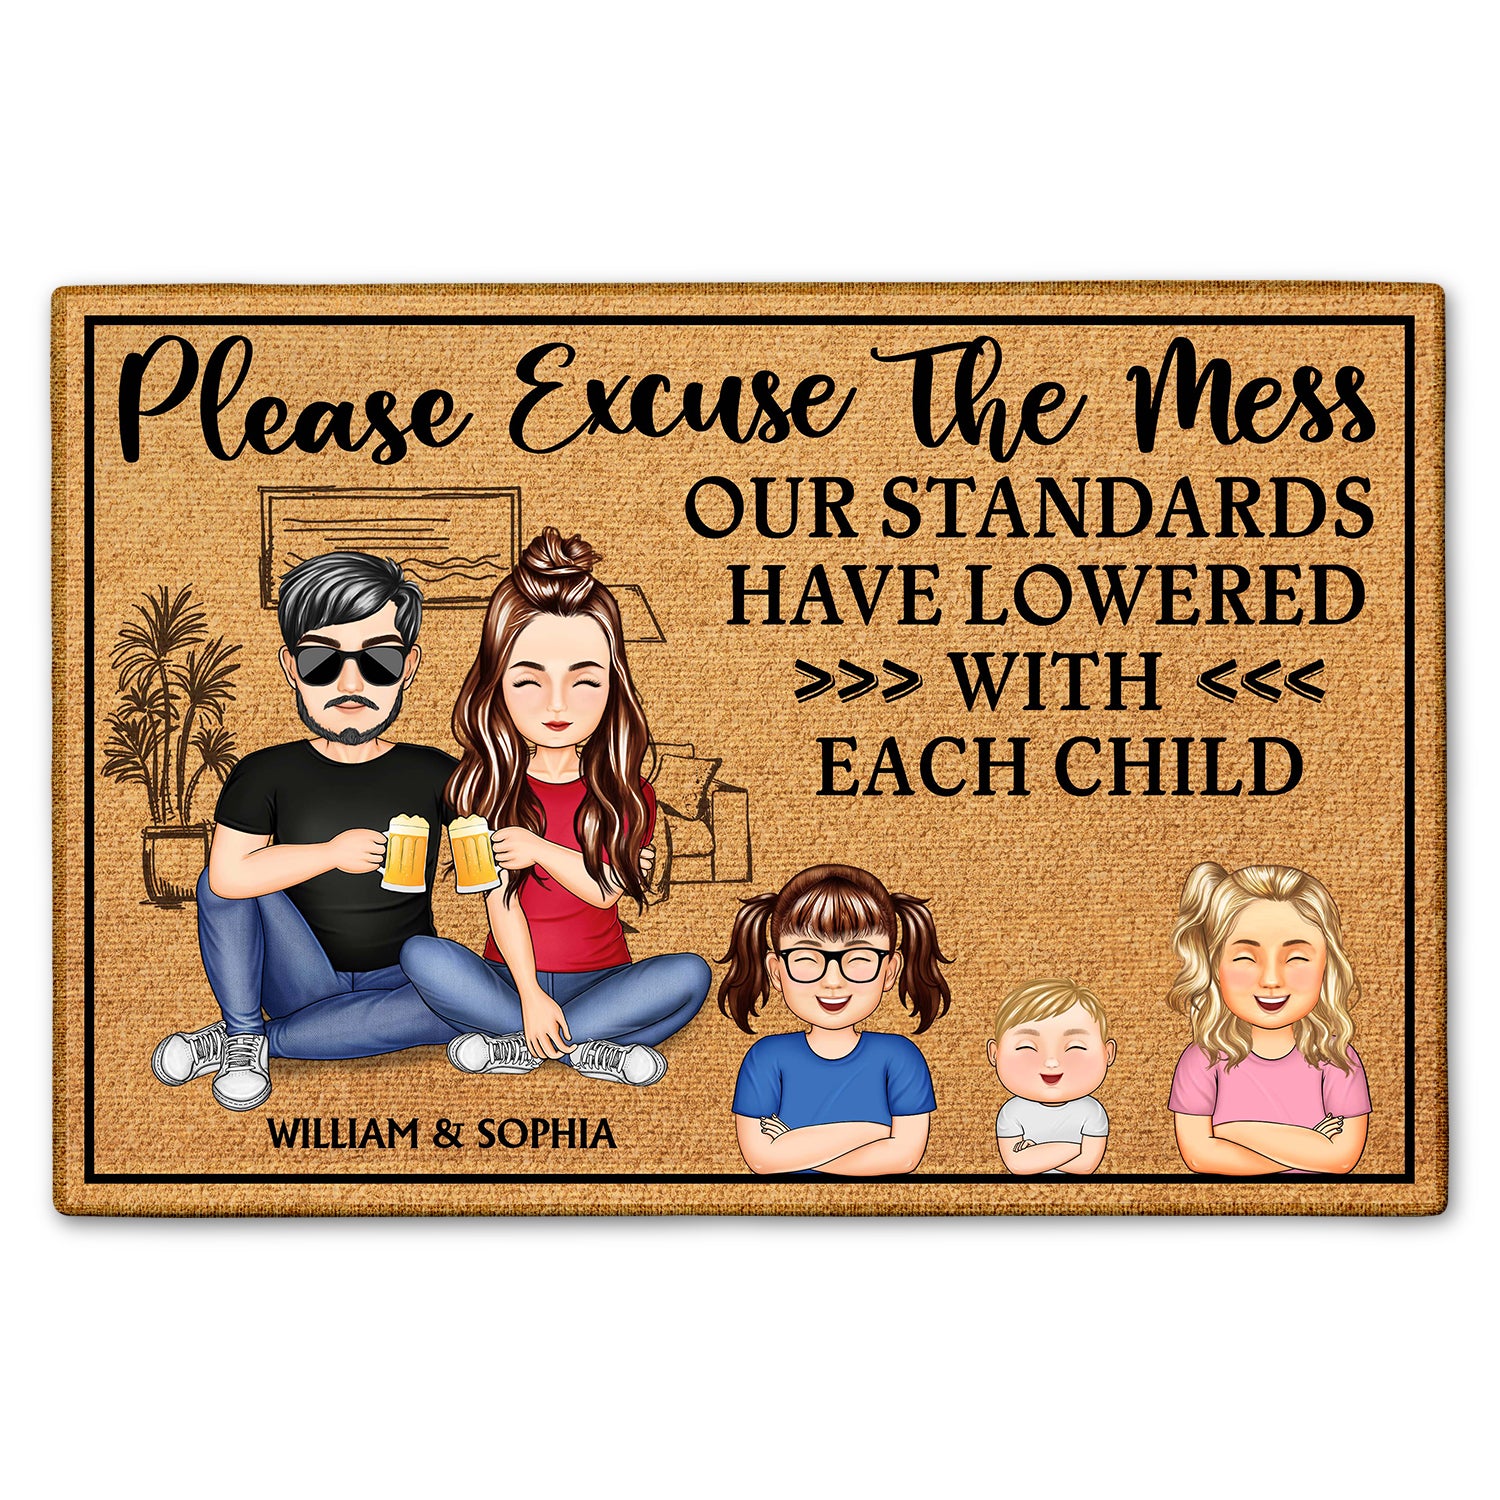 Please Excuse The Mess Our Standards - Anniversary, Birthday, Home Decor Gift For Husband, Wife, Couple, Pet Lovers - Personalized Custom Doormat